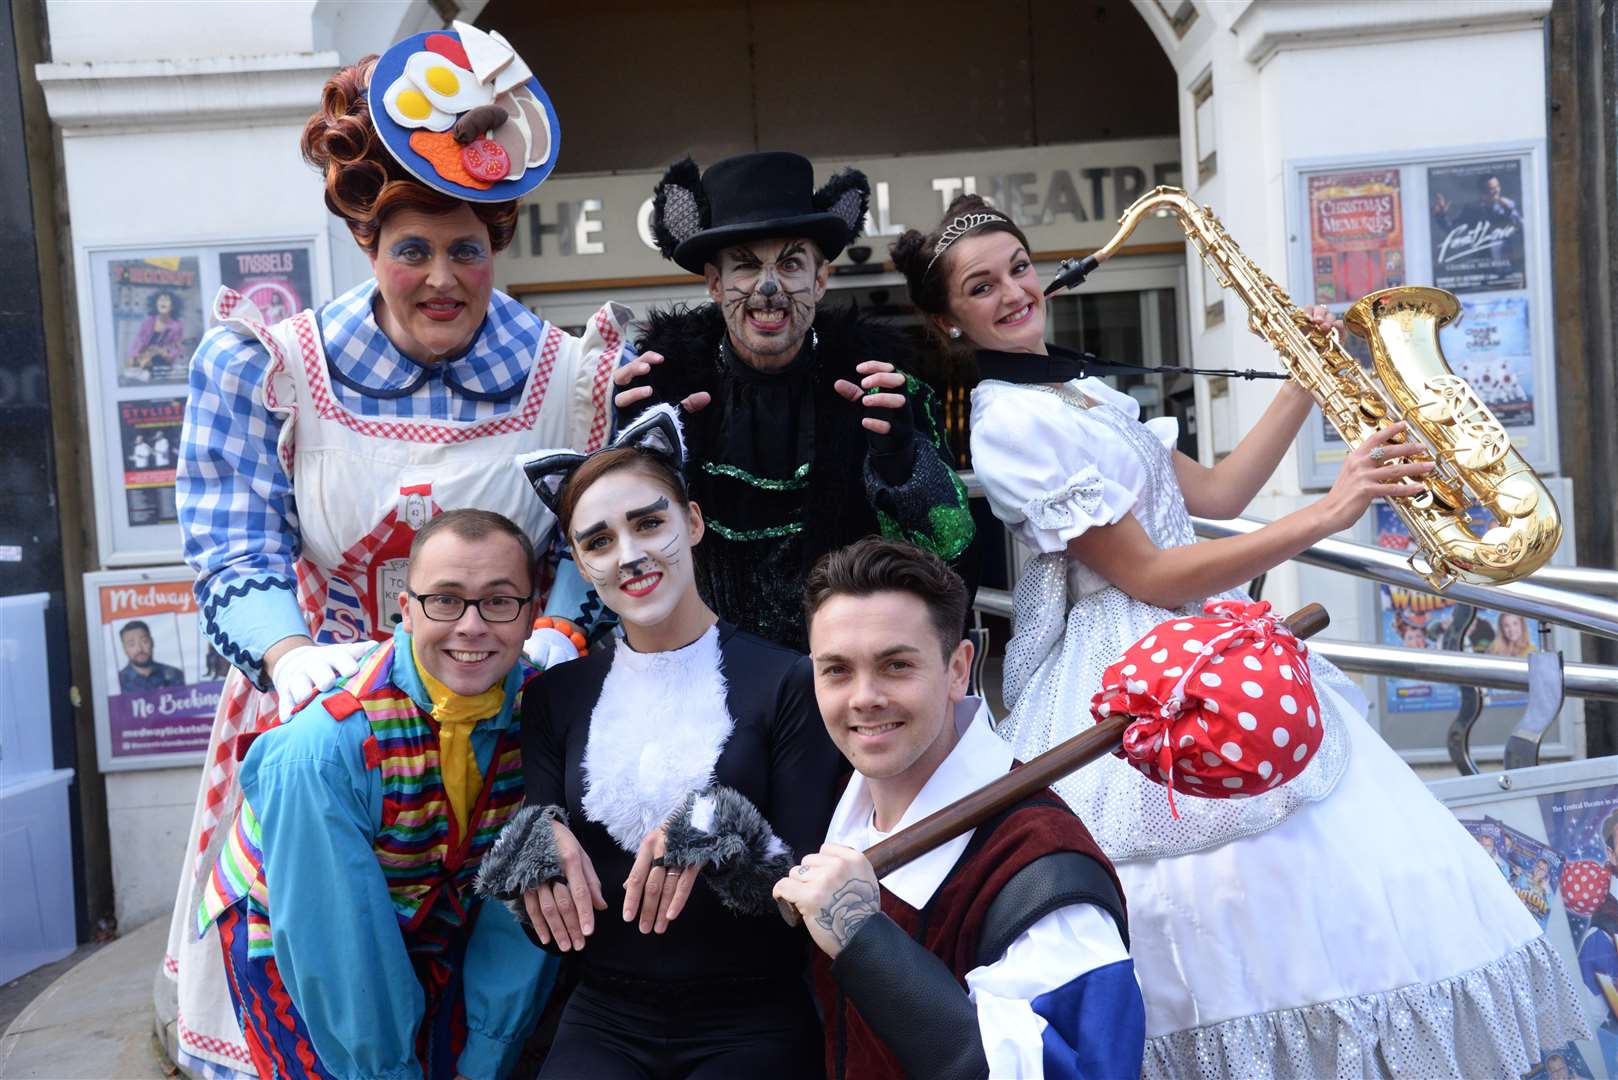 The cast of Dick Whittington at the Central Theatre, Chatham. Picture: Chris Davey. (4031548)